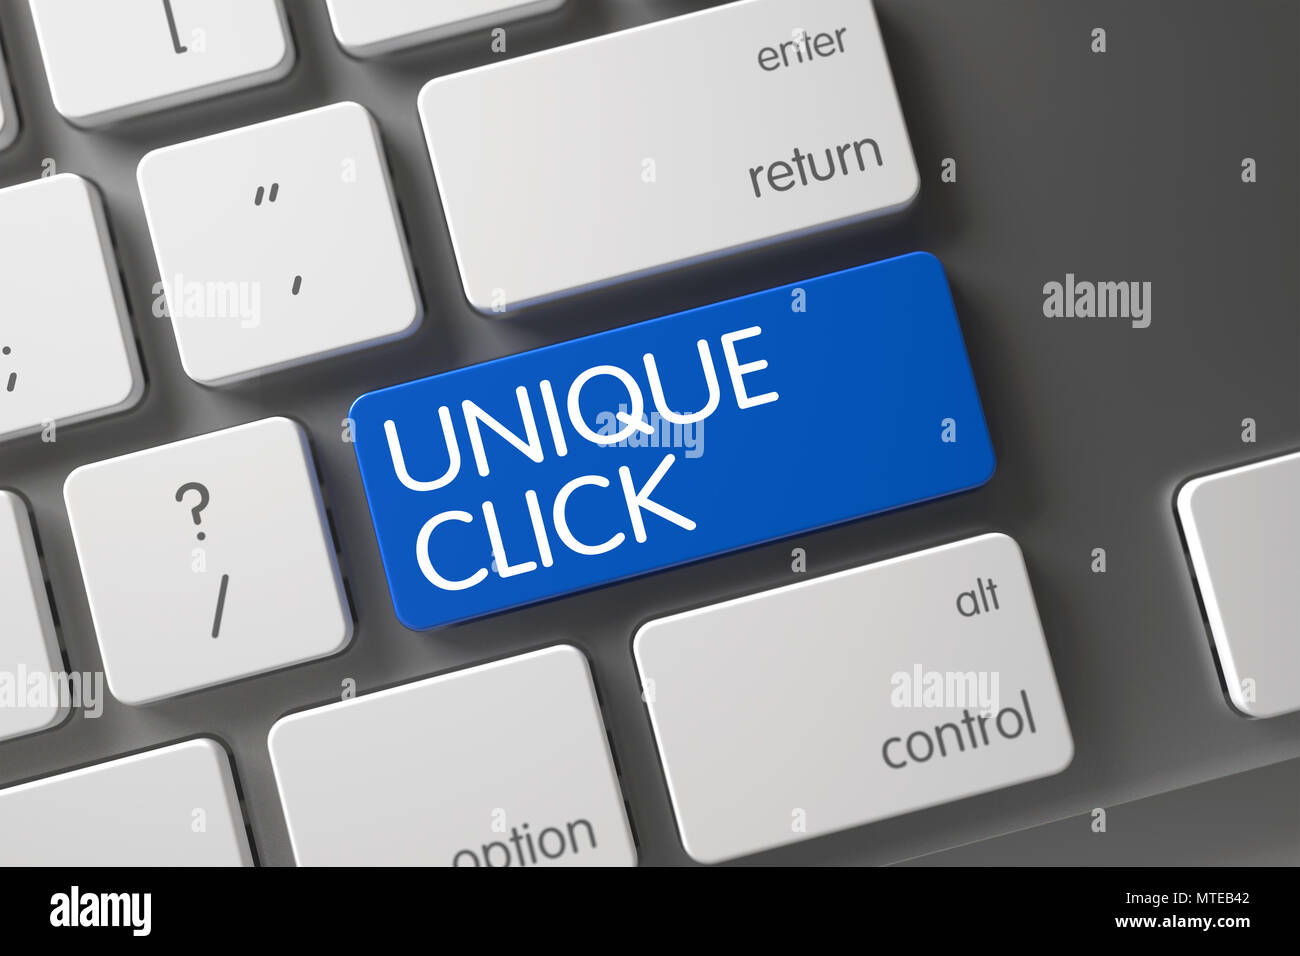 Keyboard with Blue Keypad - Unique Click. Stock Photo